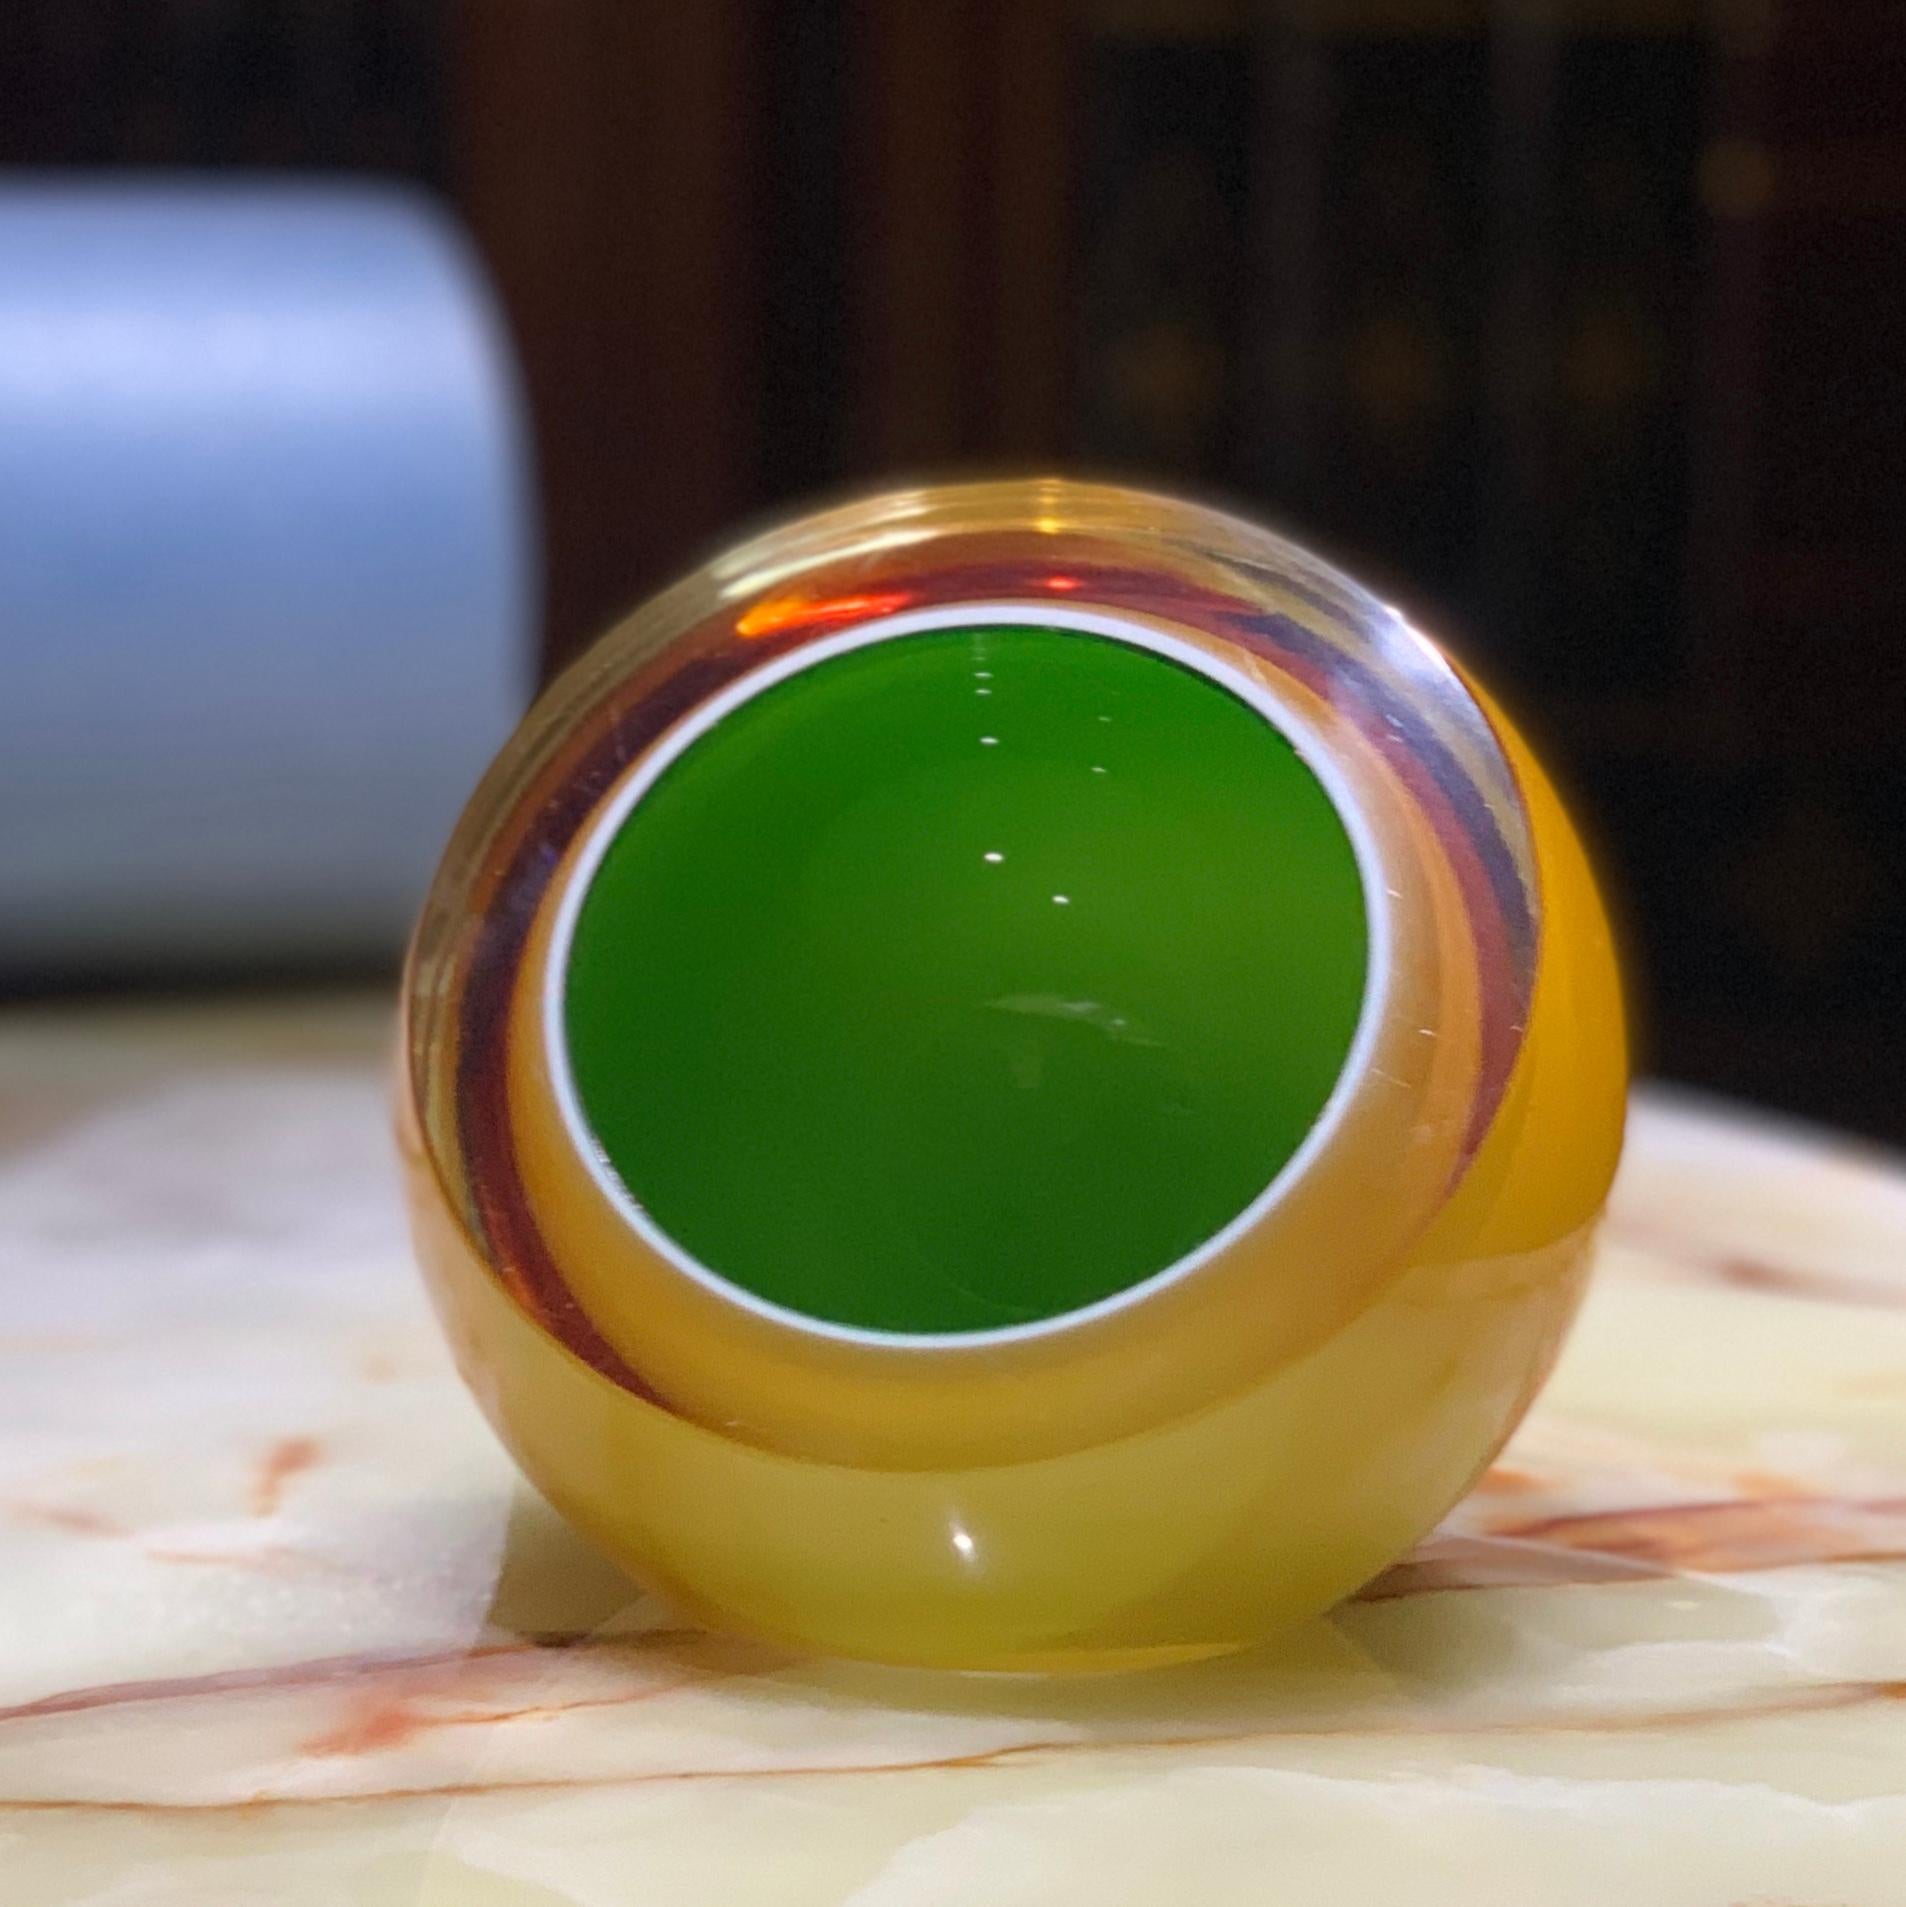 Midcentury Murano Sommerso art glass geode bowl, Barbini, yellow amber and green. Gorgeous substantial midcentury piece.